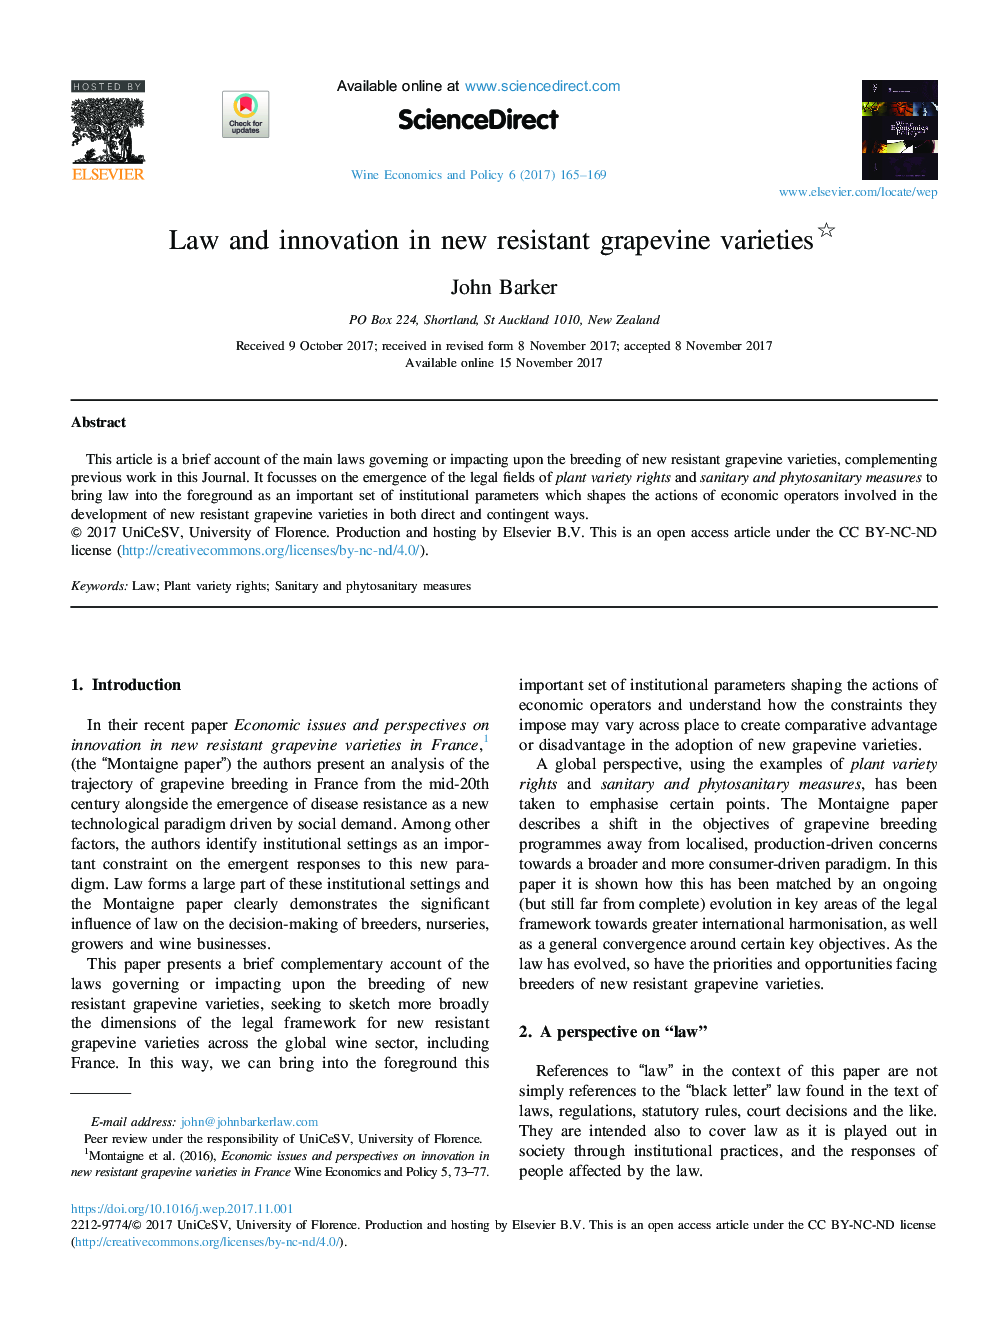 Law and innovation in new resistant grapevine varieties